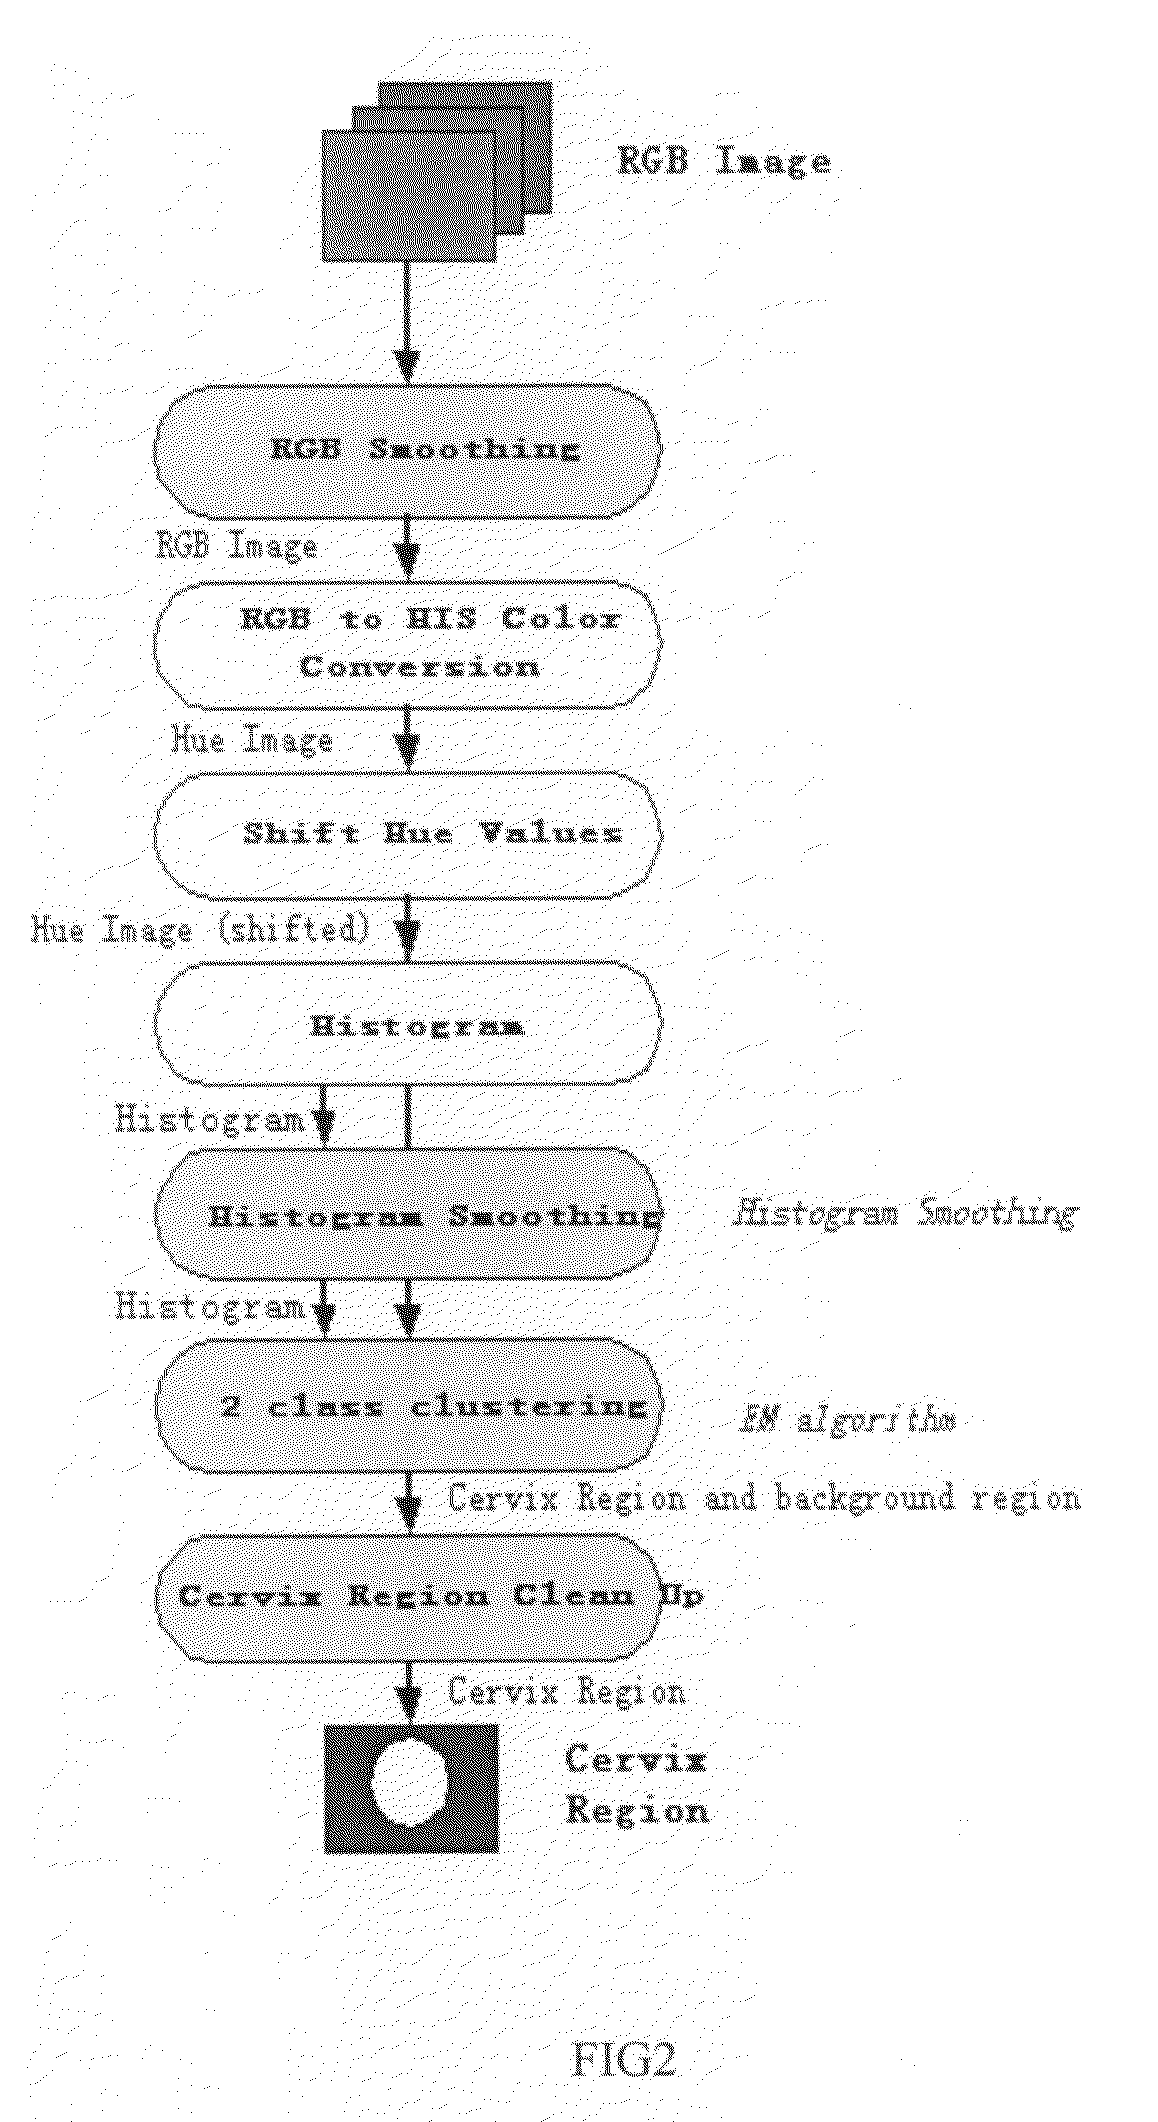 Method of image quality assessment to produce standardized imaging data